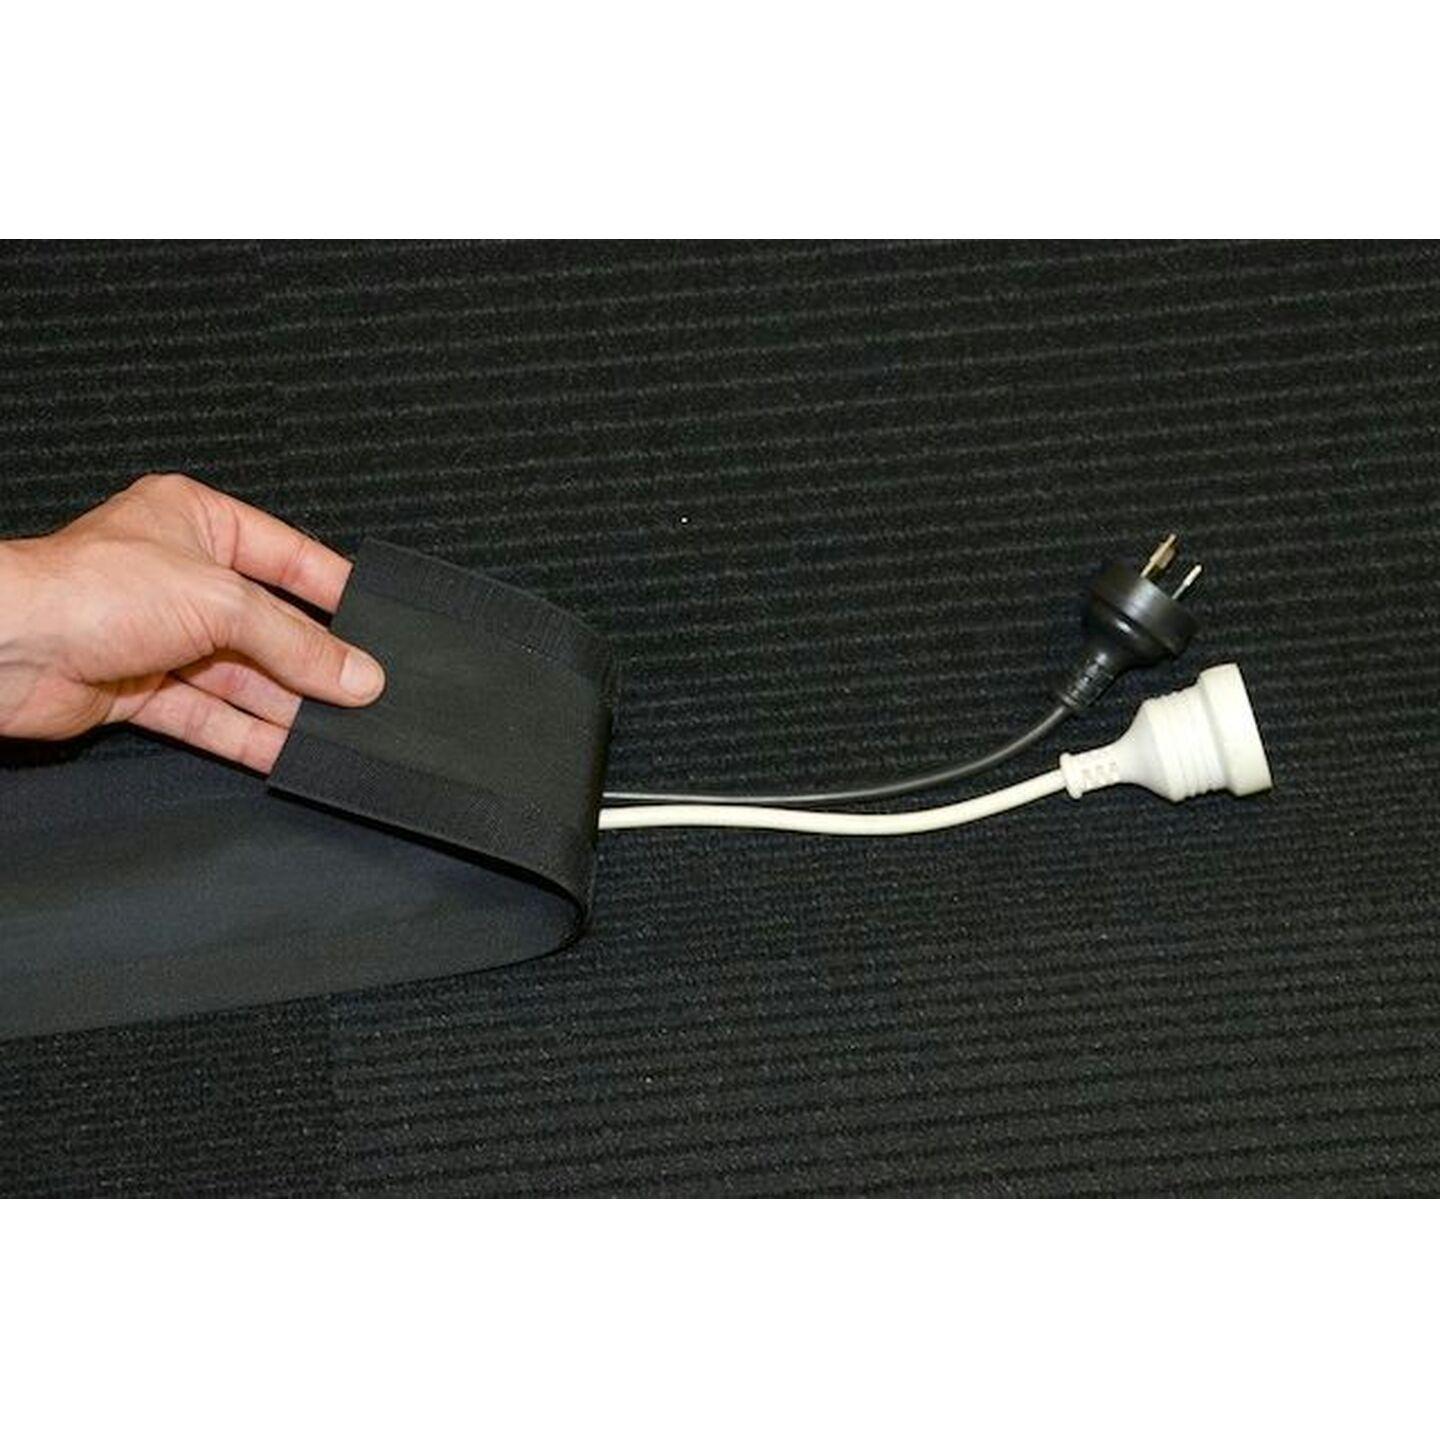 Secure Cord Cable Cover Black - 5m Roll